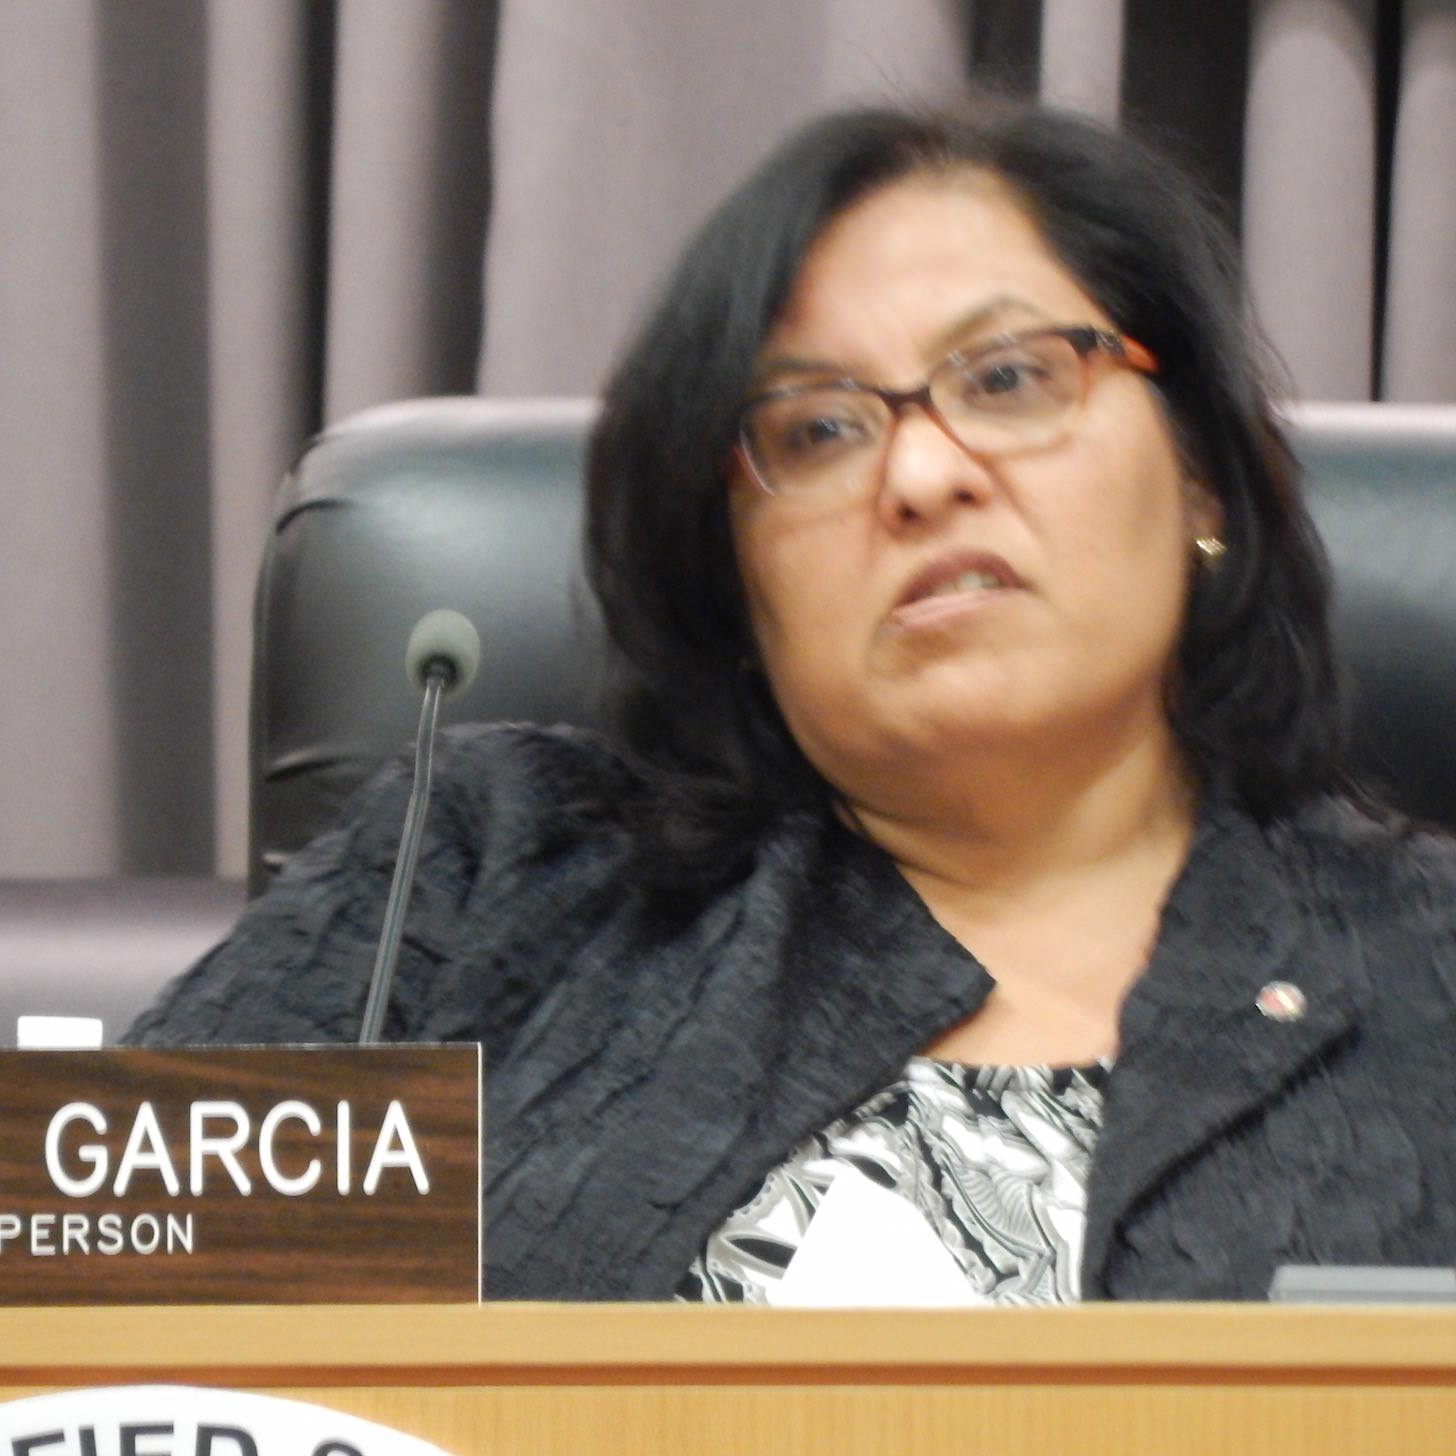 Monica Garcia disgusted by report